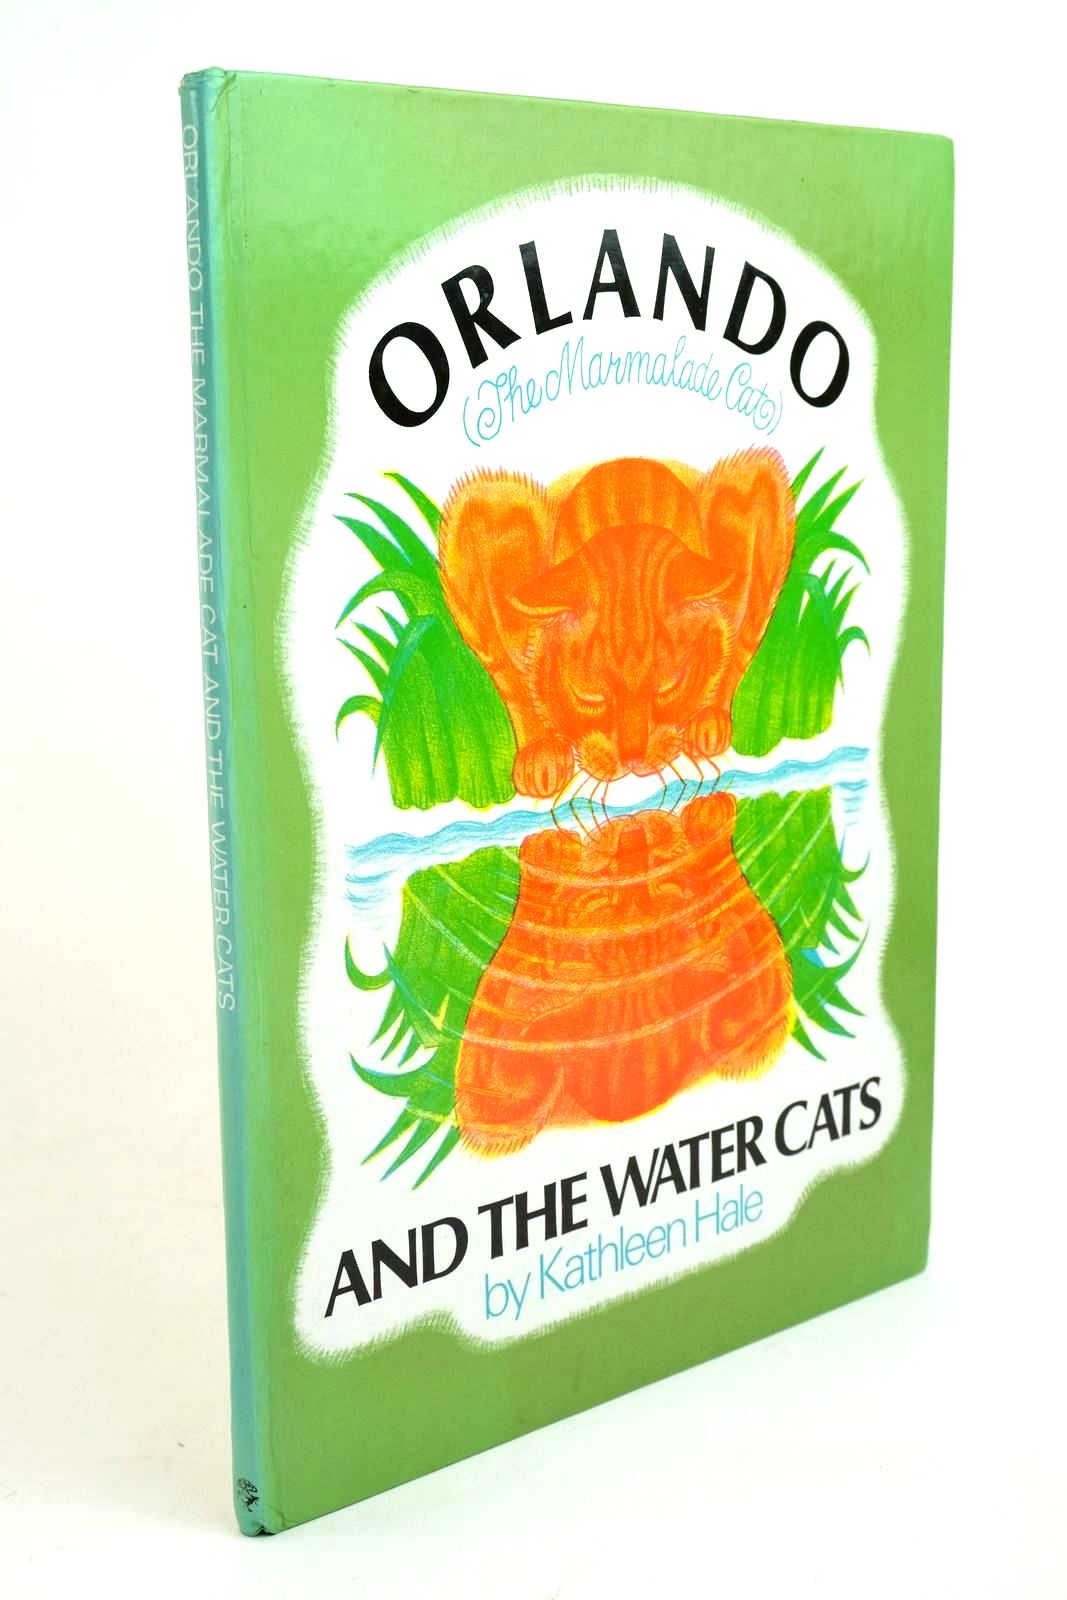 Photo of ORLANDO (THE MARMALADE CAT) AND THE WATER CATS- Stock Number: 1321864